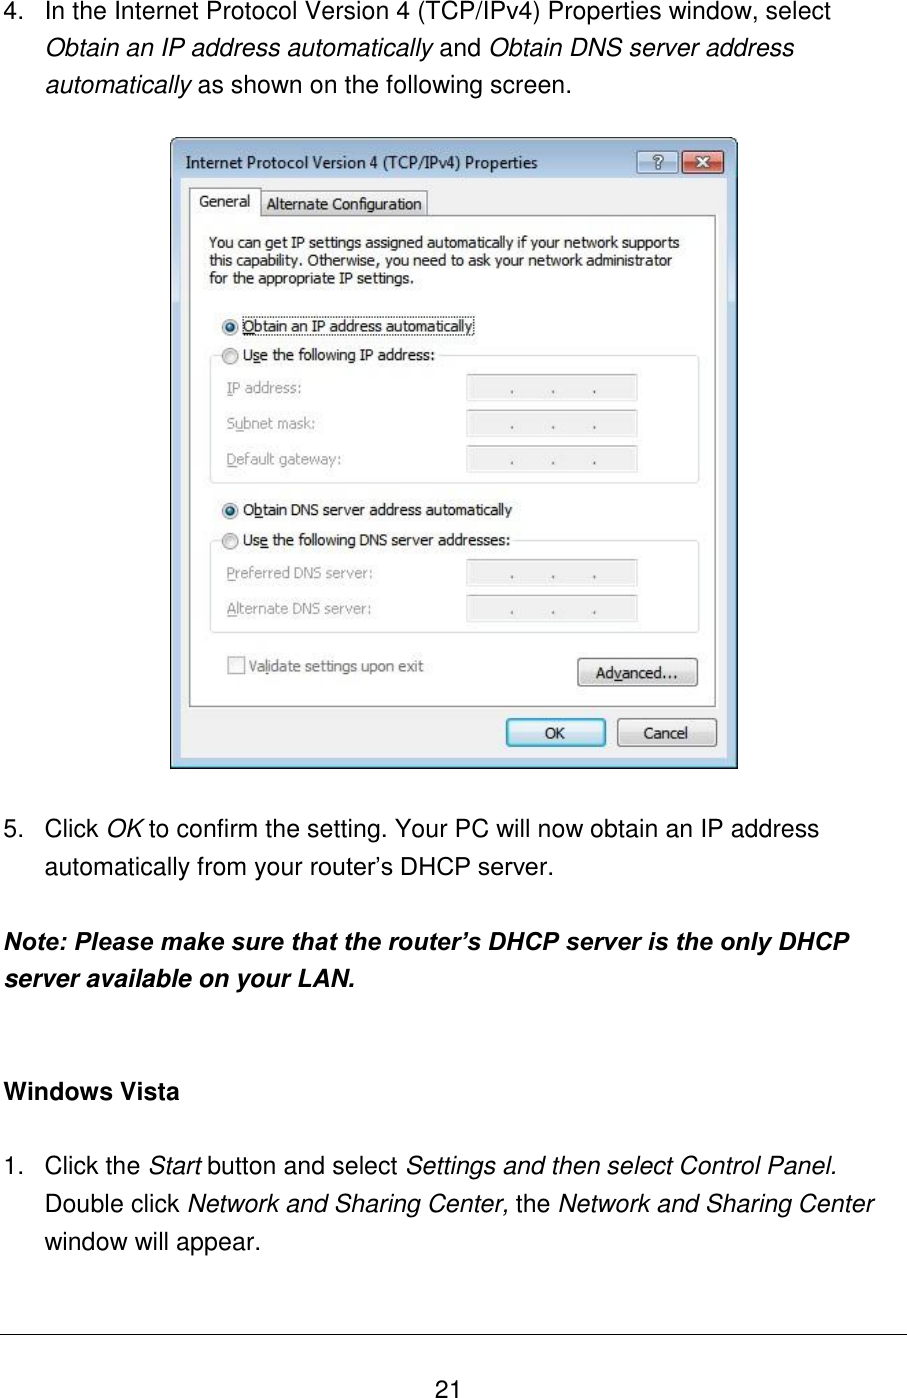   21 4.  In the Internet Protocol Version 4 (TCP/IPv4) Properties window, select Obtain an IP address automatically and Obtain DNS server address automatically as shown on the following screen.    5.  Click OK to confirm the setting. Your PC will now obtain an IP address automatically from your router’s DHCP server.  Note: Please make sure that the router’s DHCP server is the only DHCP server available on your LAN.   Windows Vista  1.  Click the Start button and select Settings and then select Control Panel.  Double click Network and Sharing Center, the Network and Sharing Center window will appear.  